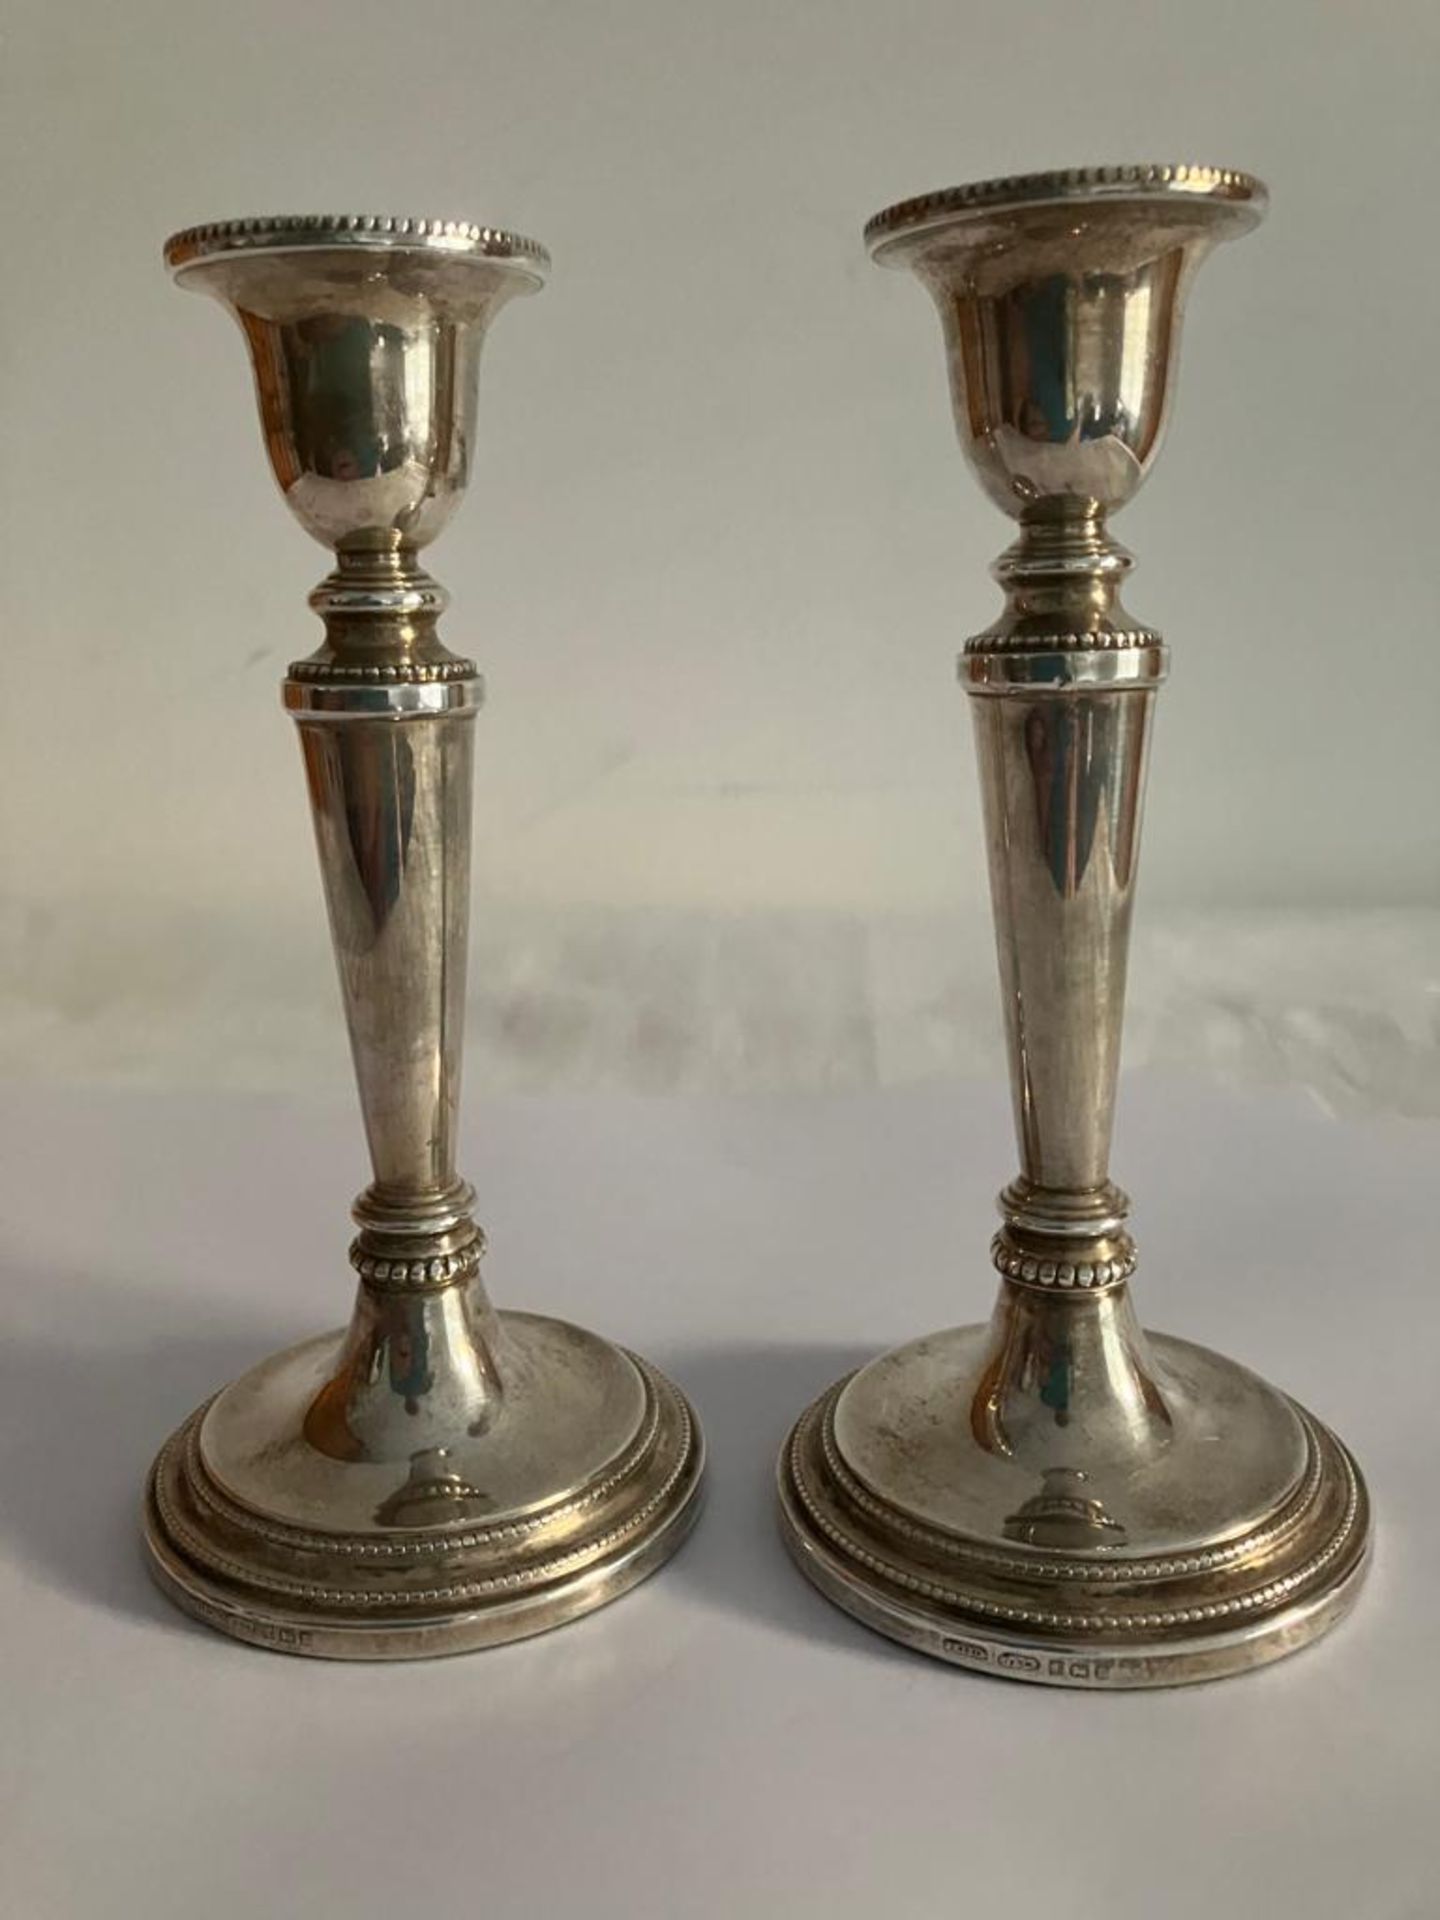 A handsome pair of vintage SILVER CANDLESTICKS. Attractive tapered form standing 14 cm high.